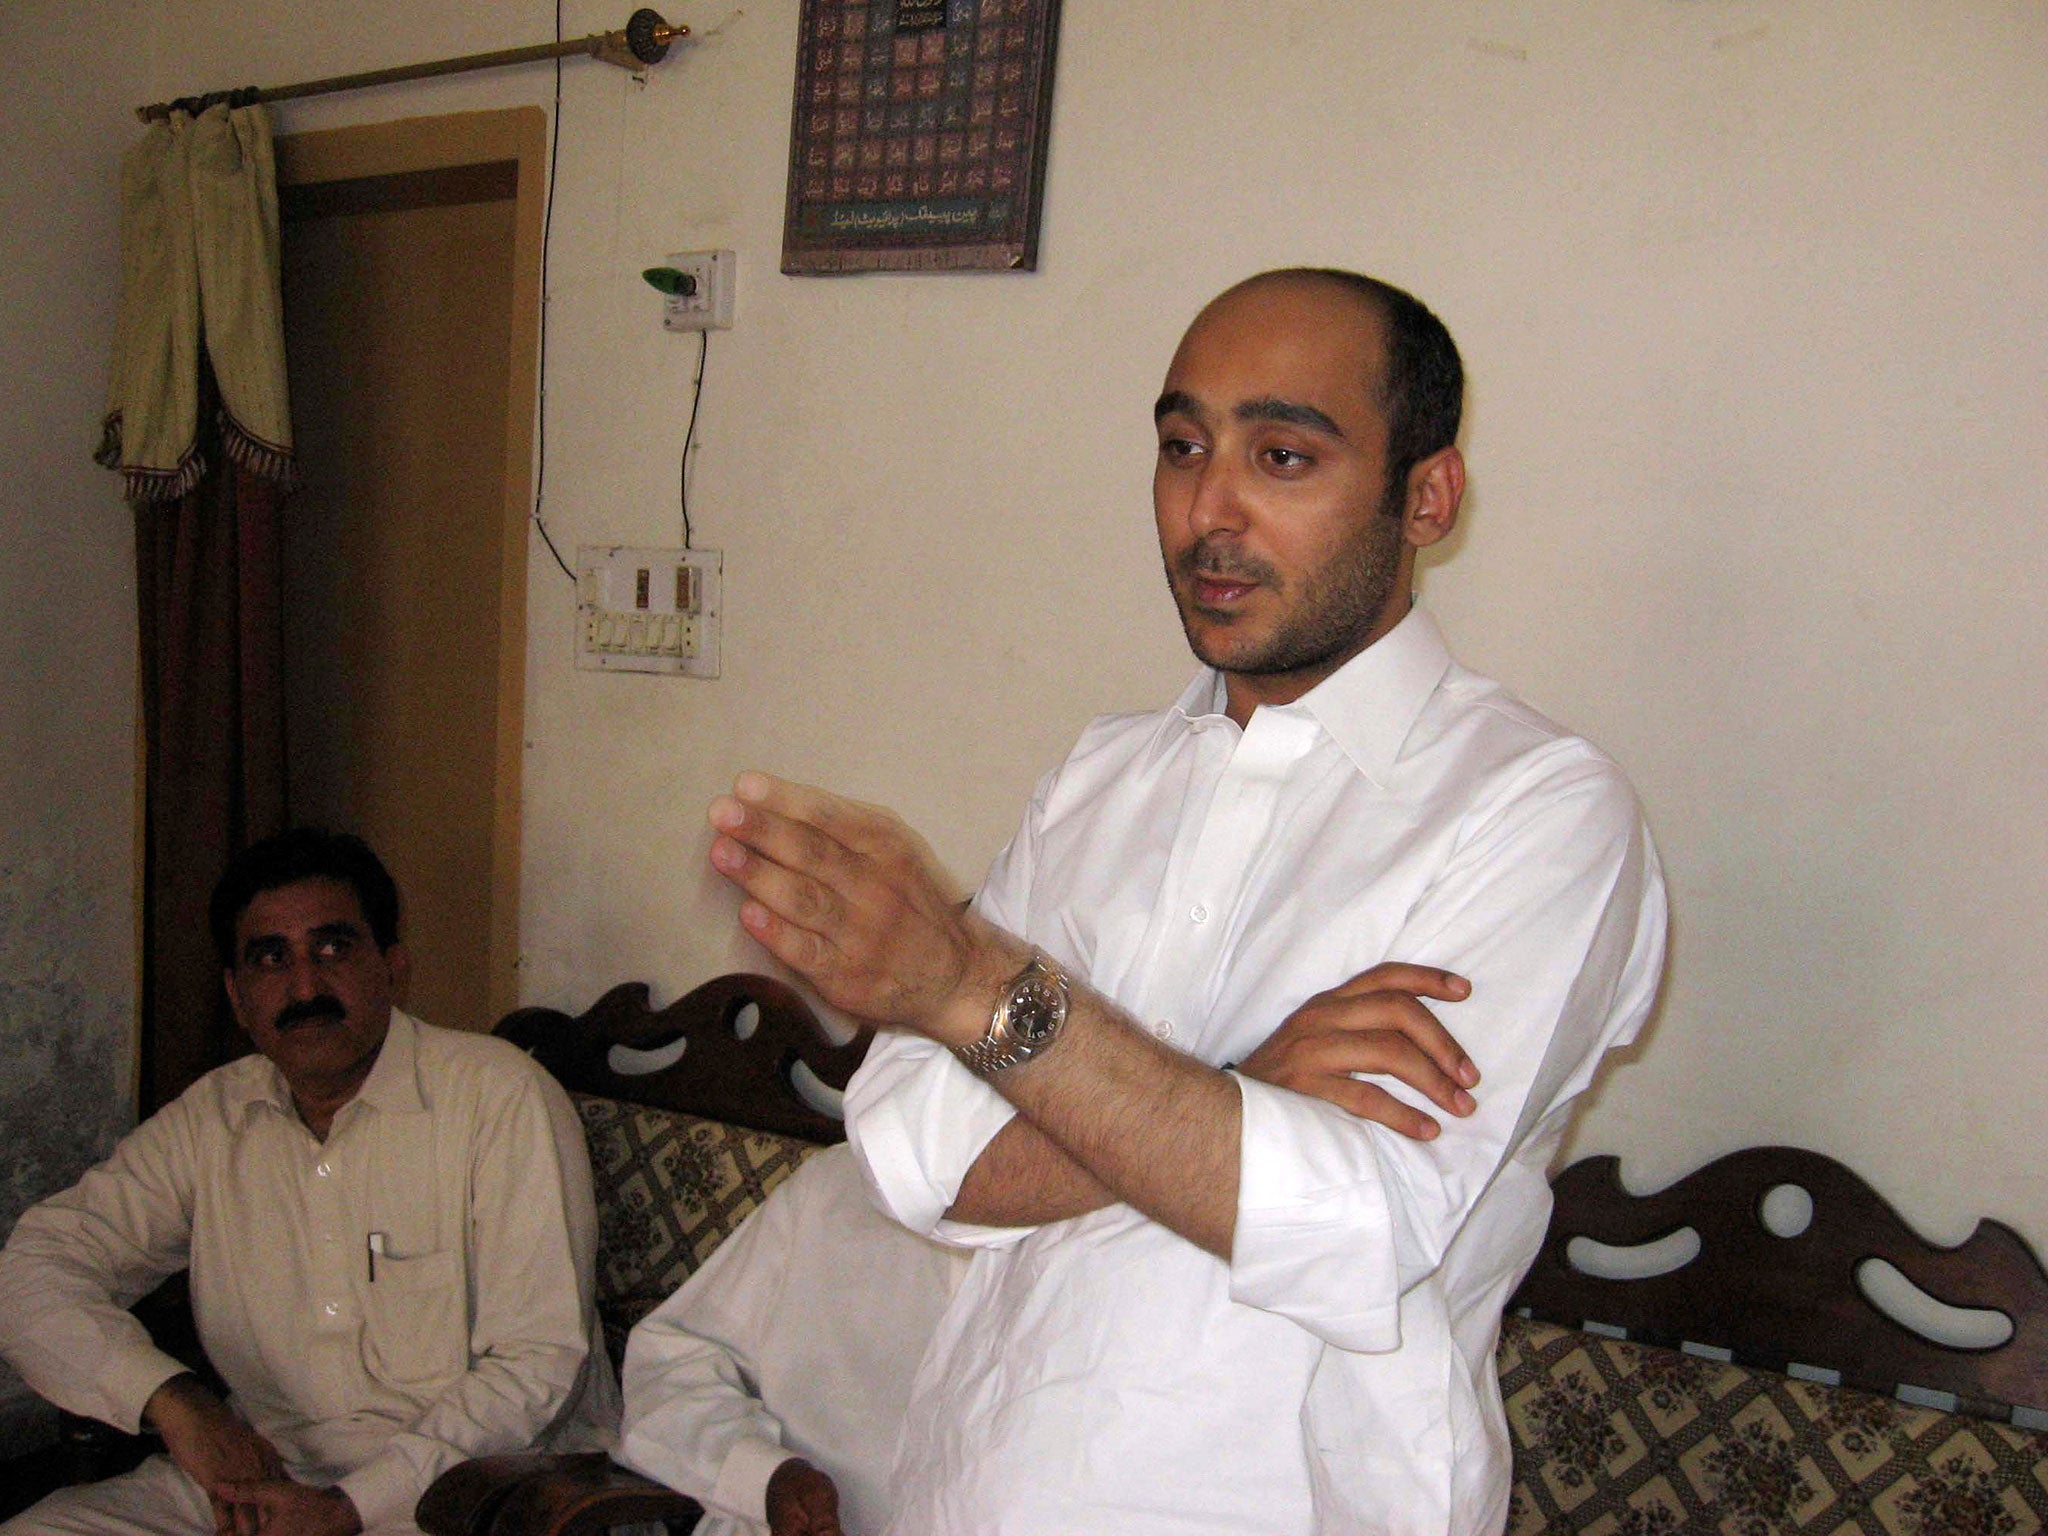 Ali Haider Gilani, son of former Pakistani Prime Minister Yusuf Raza Gilani, speaks at a house on the outskirts of Multan on 9 May, 2013, before his abduction